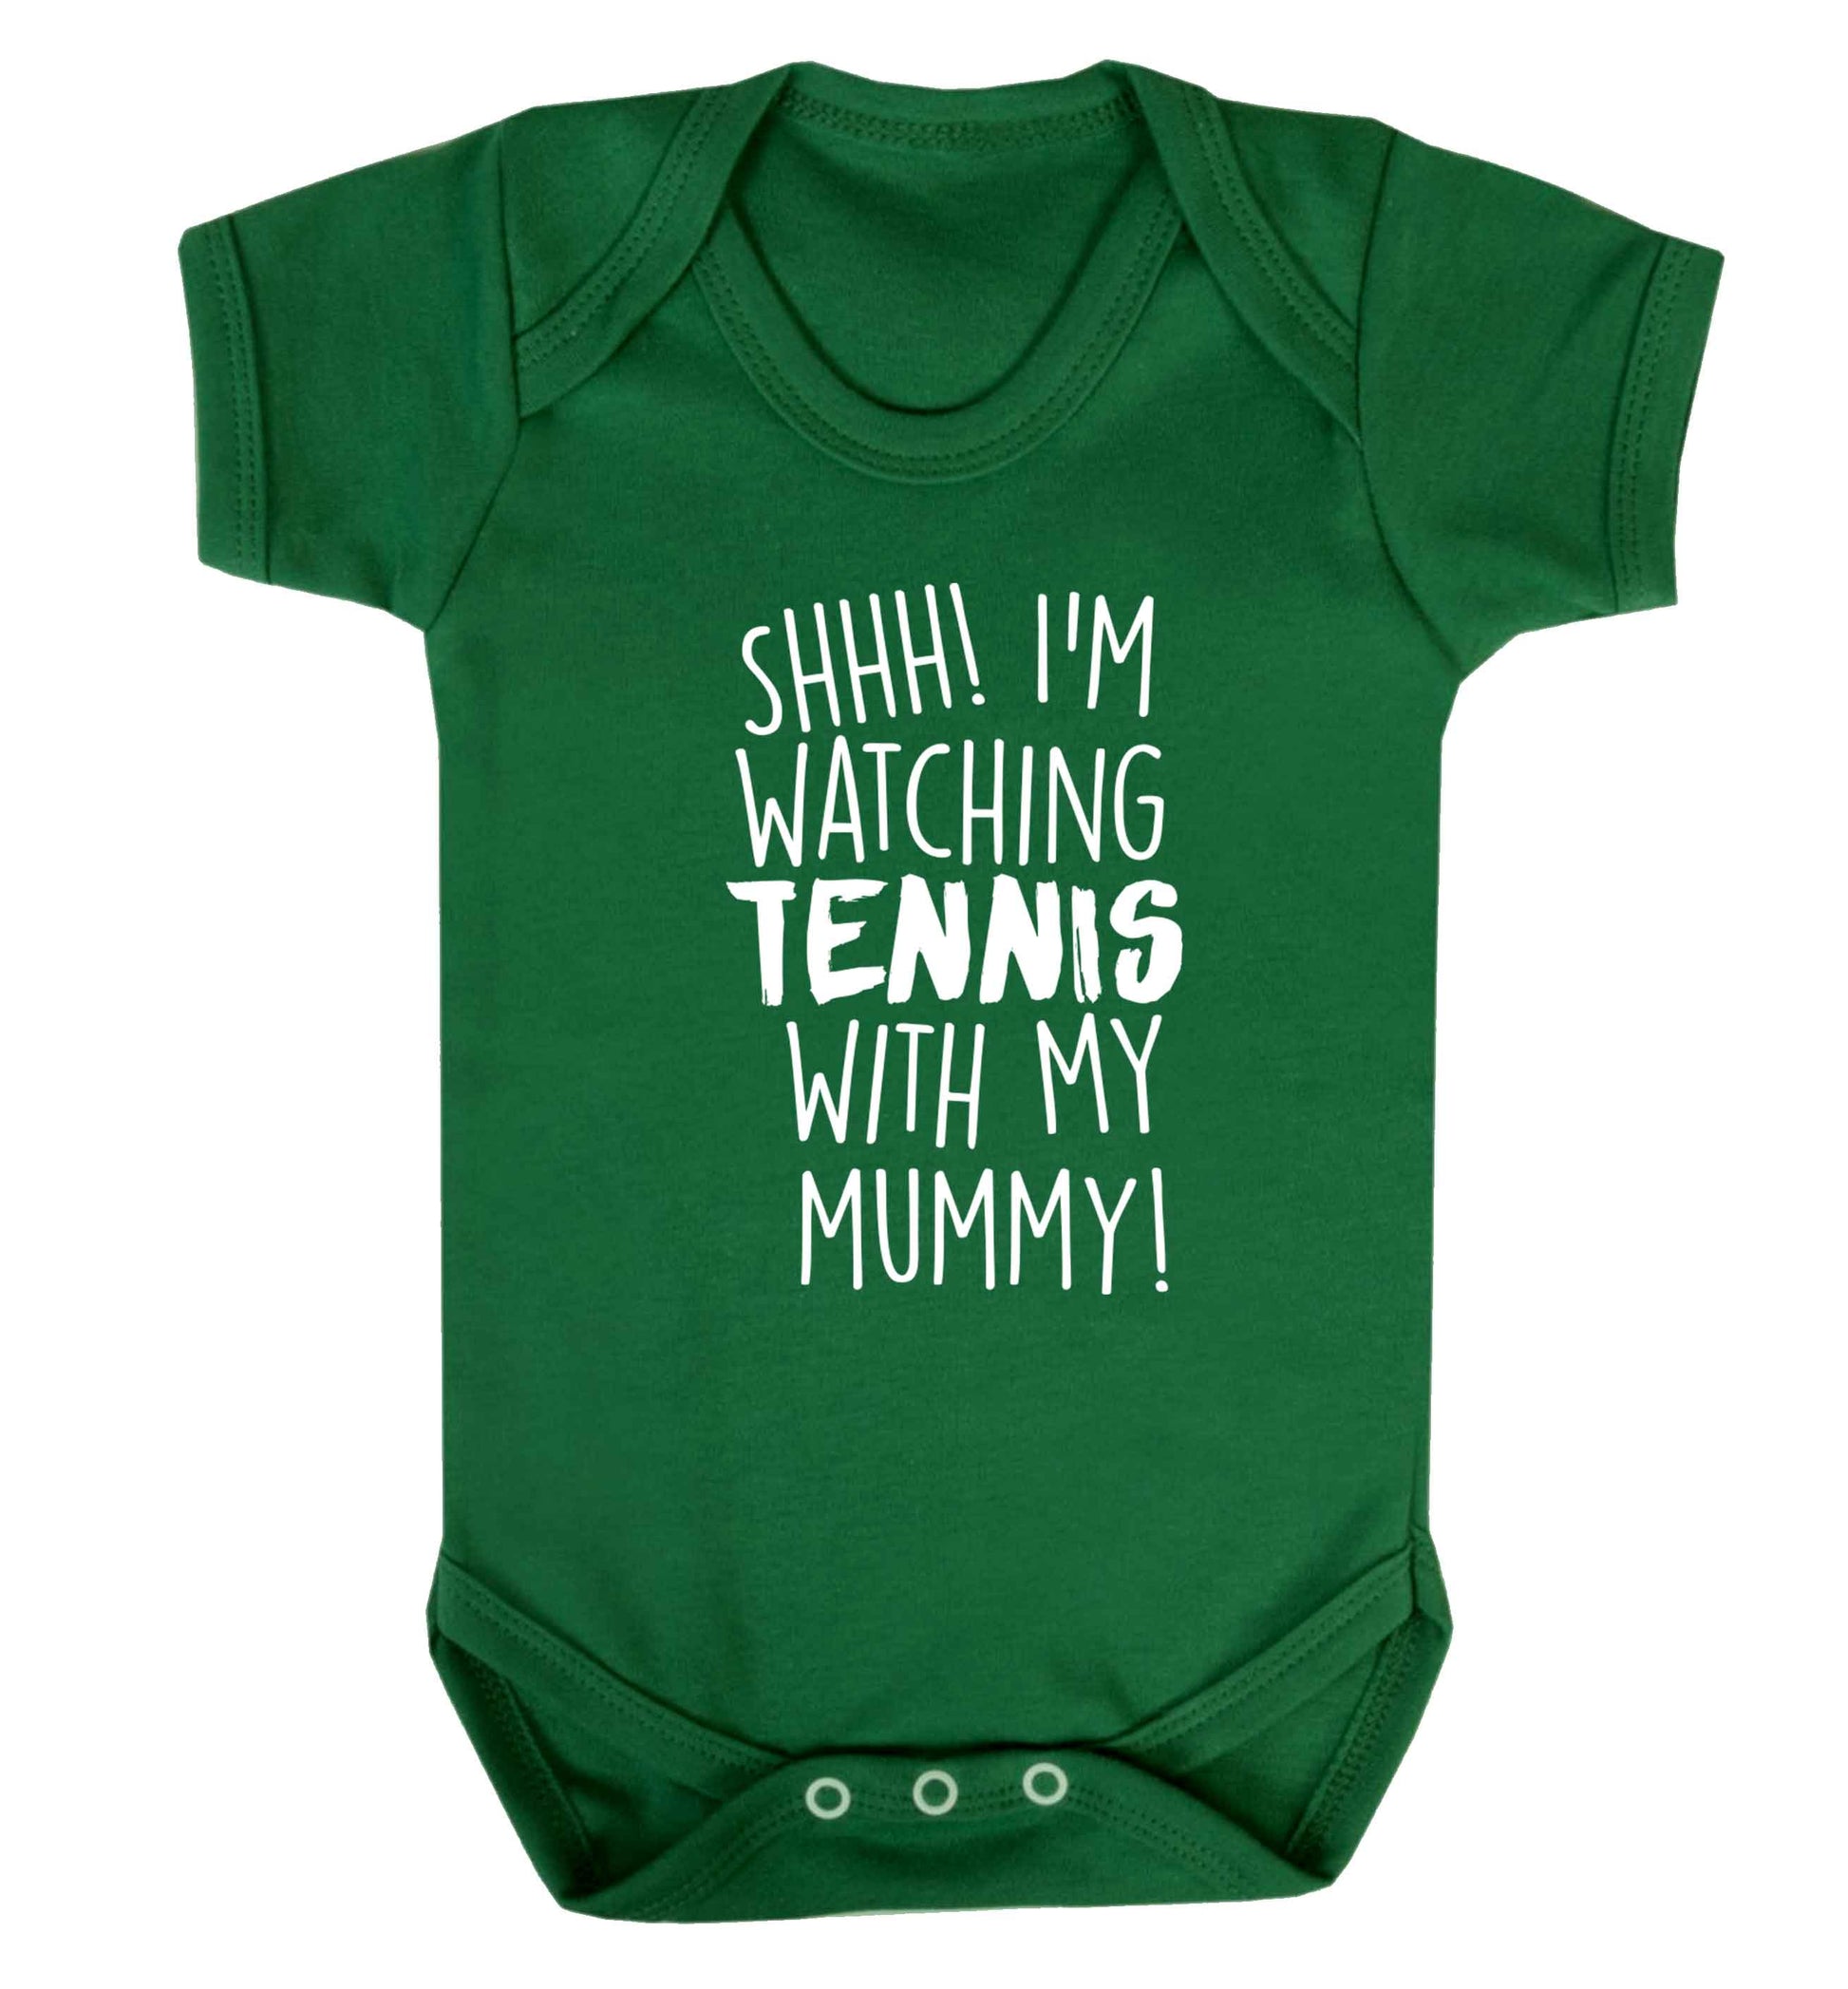 Shh! I'm watching tennis with my mummy! Baby Vest green 18-24 months